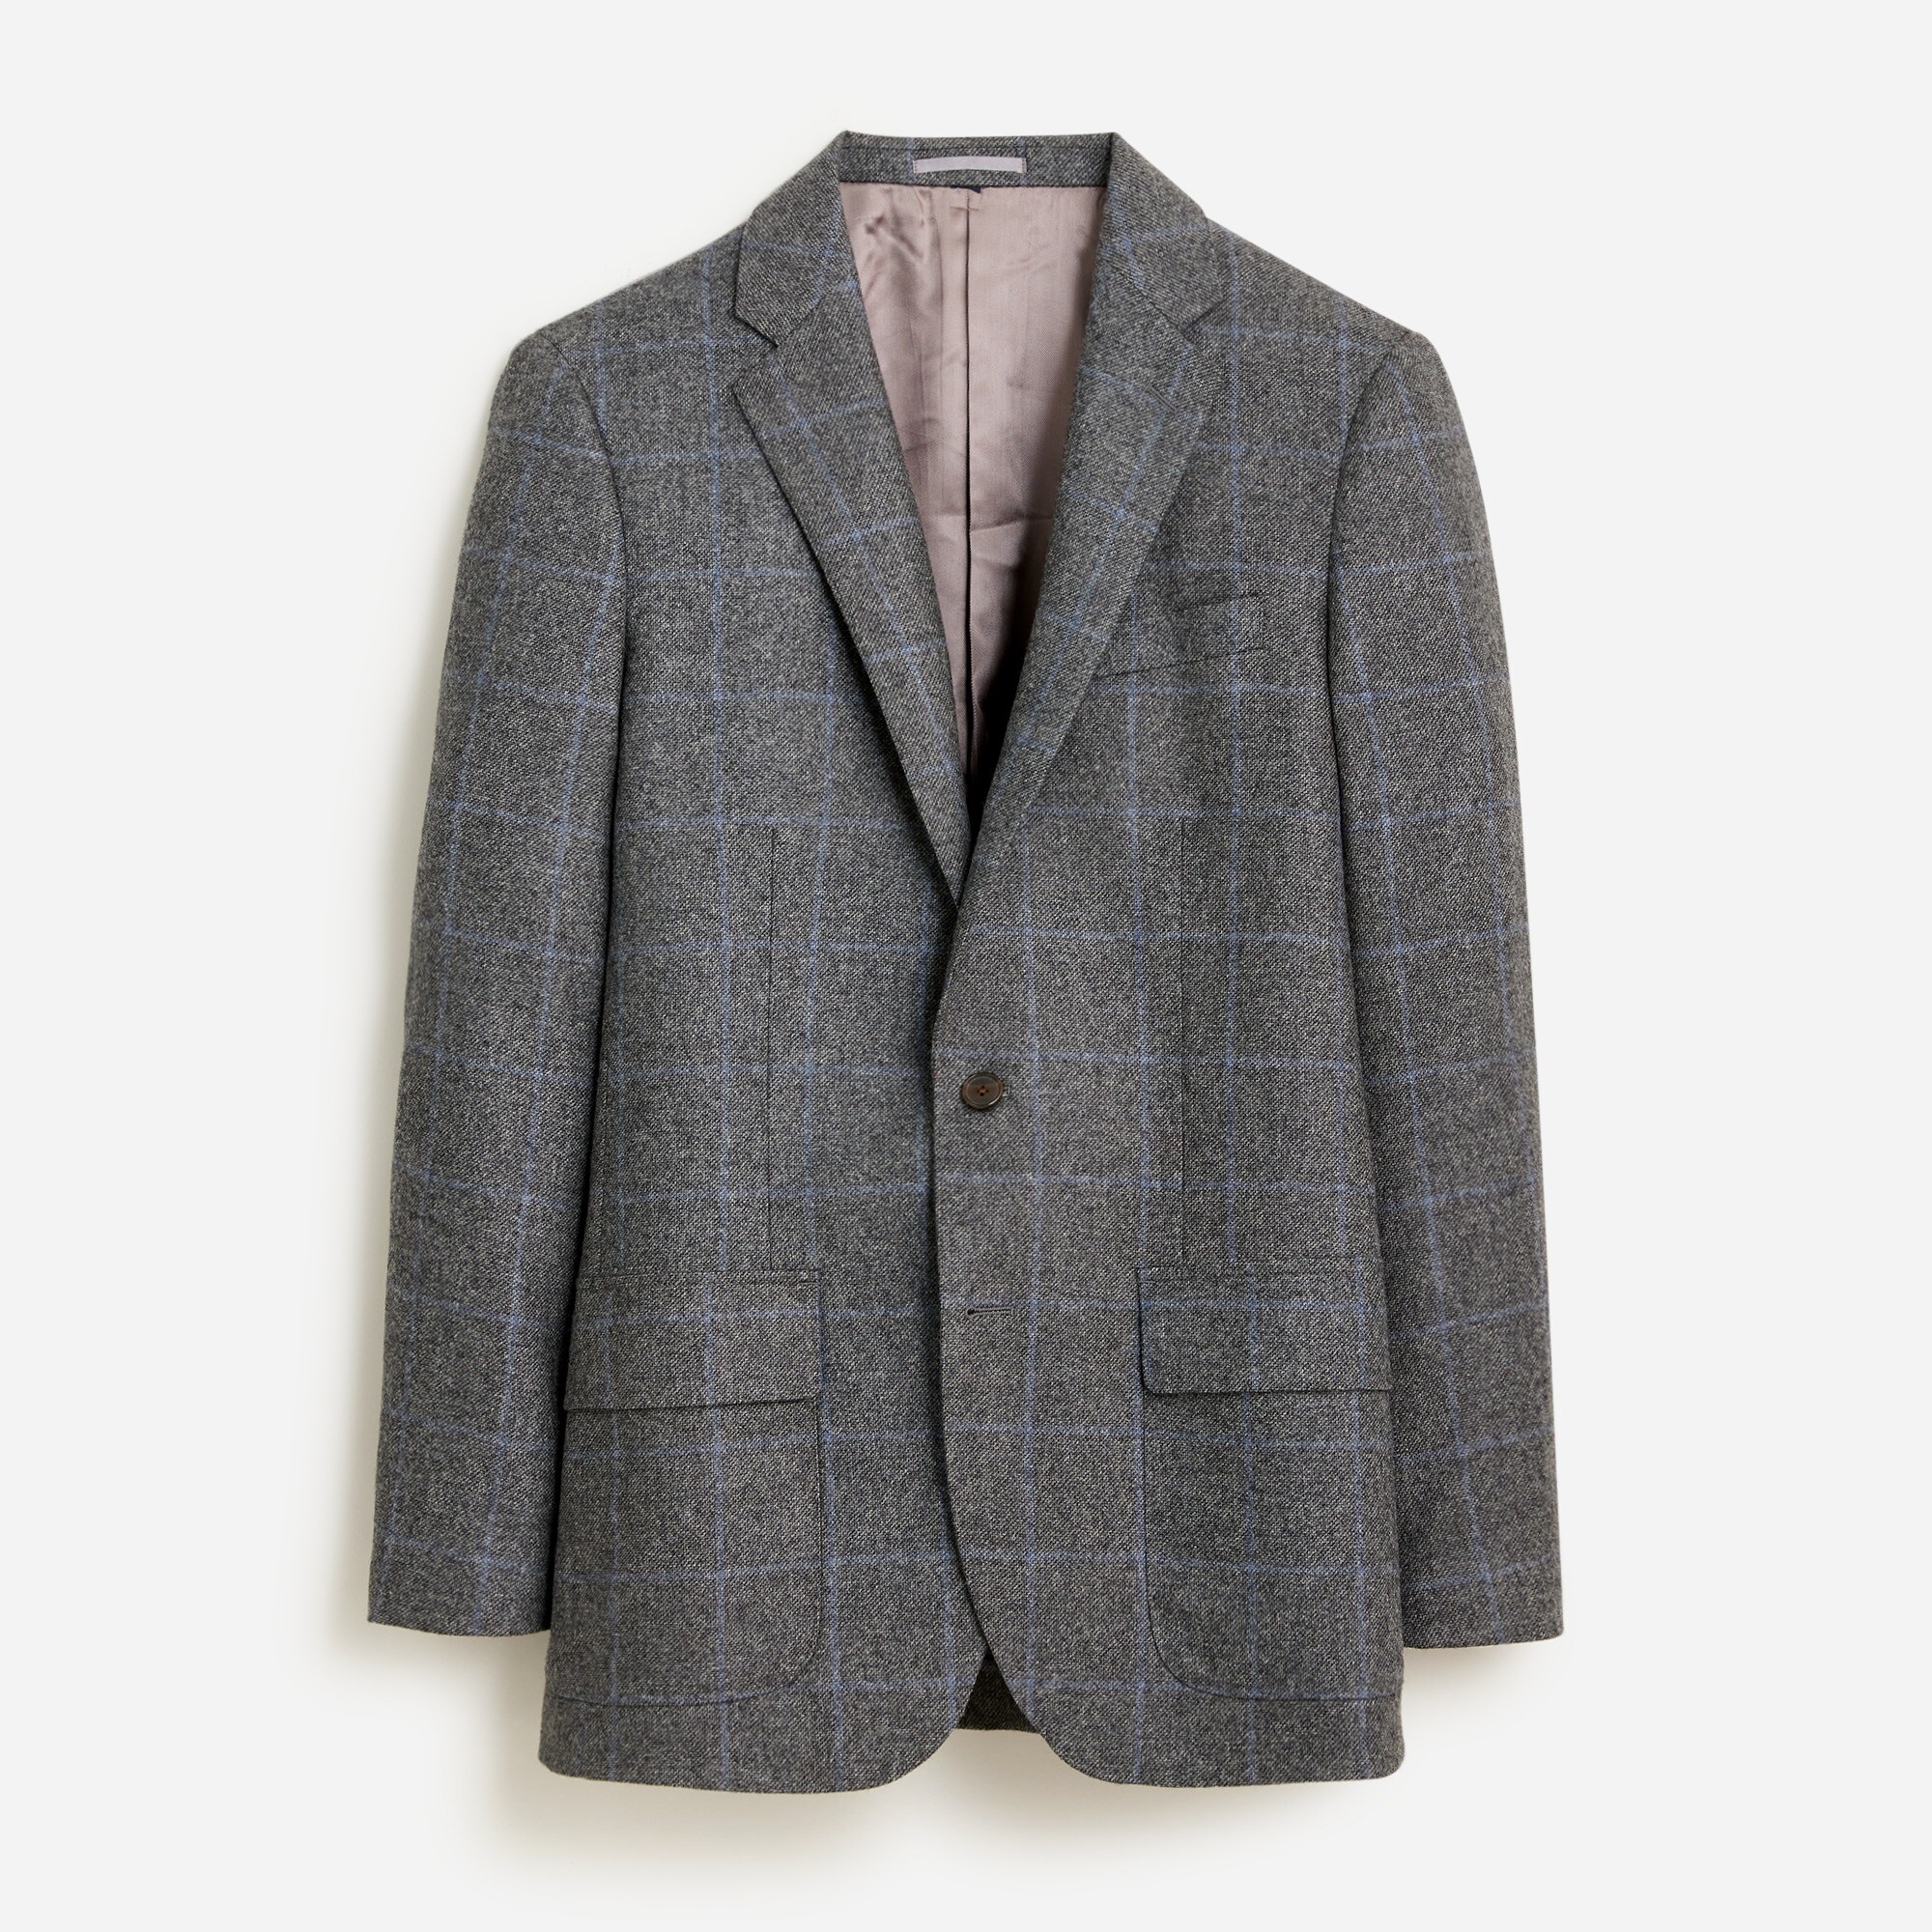  Ludlow Slim-fit suit jacket in English cashmere